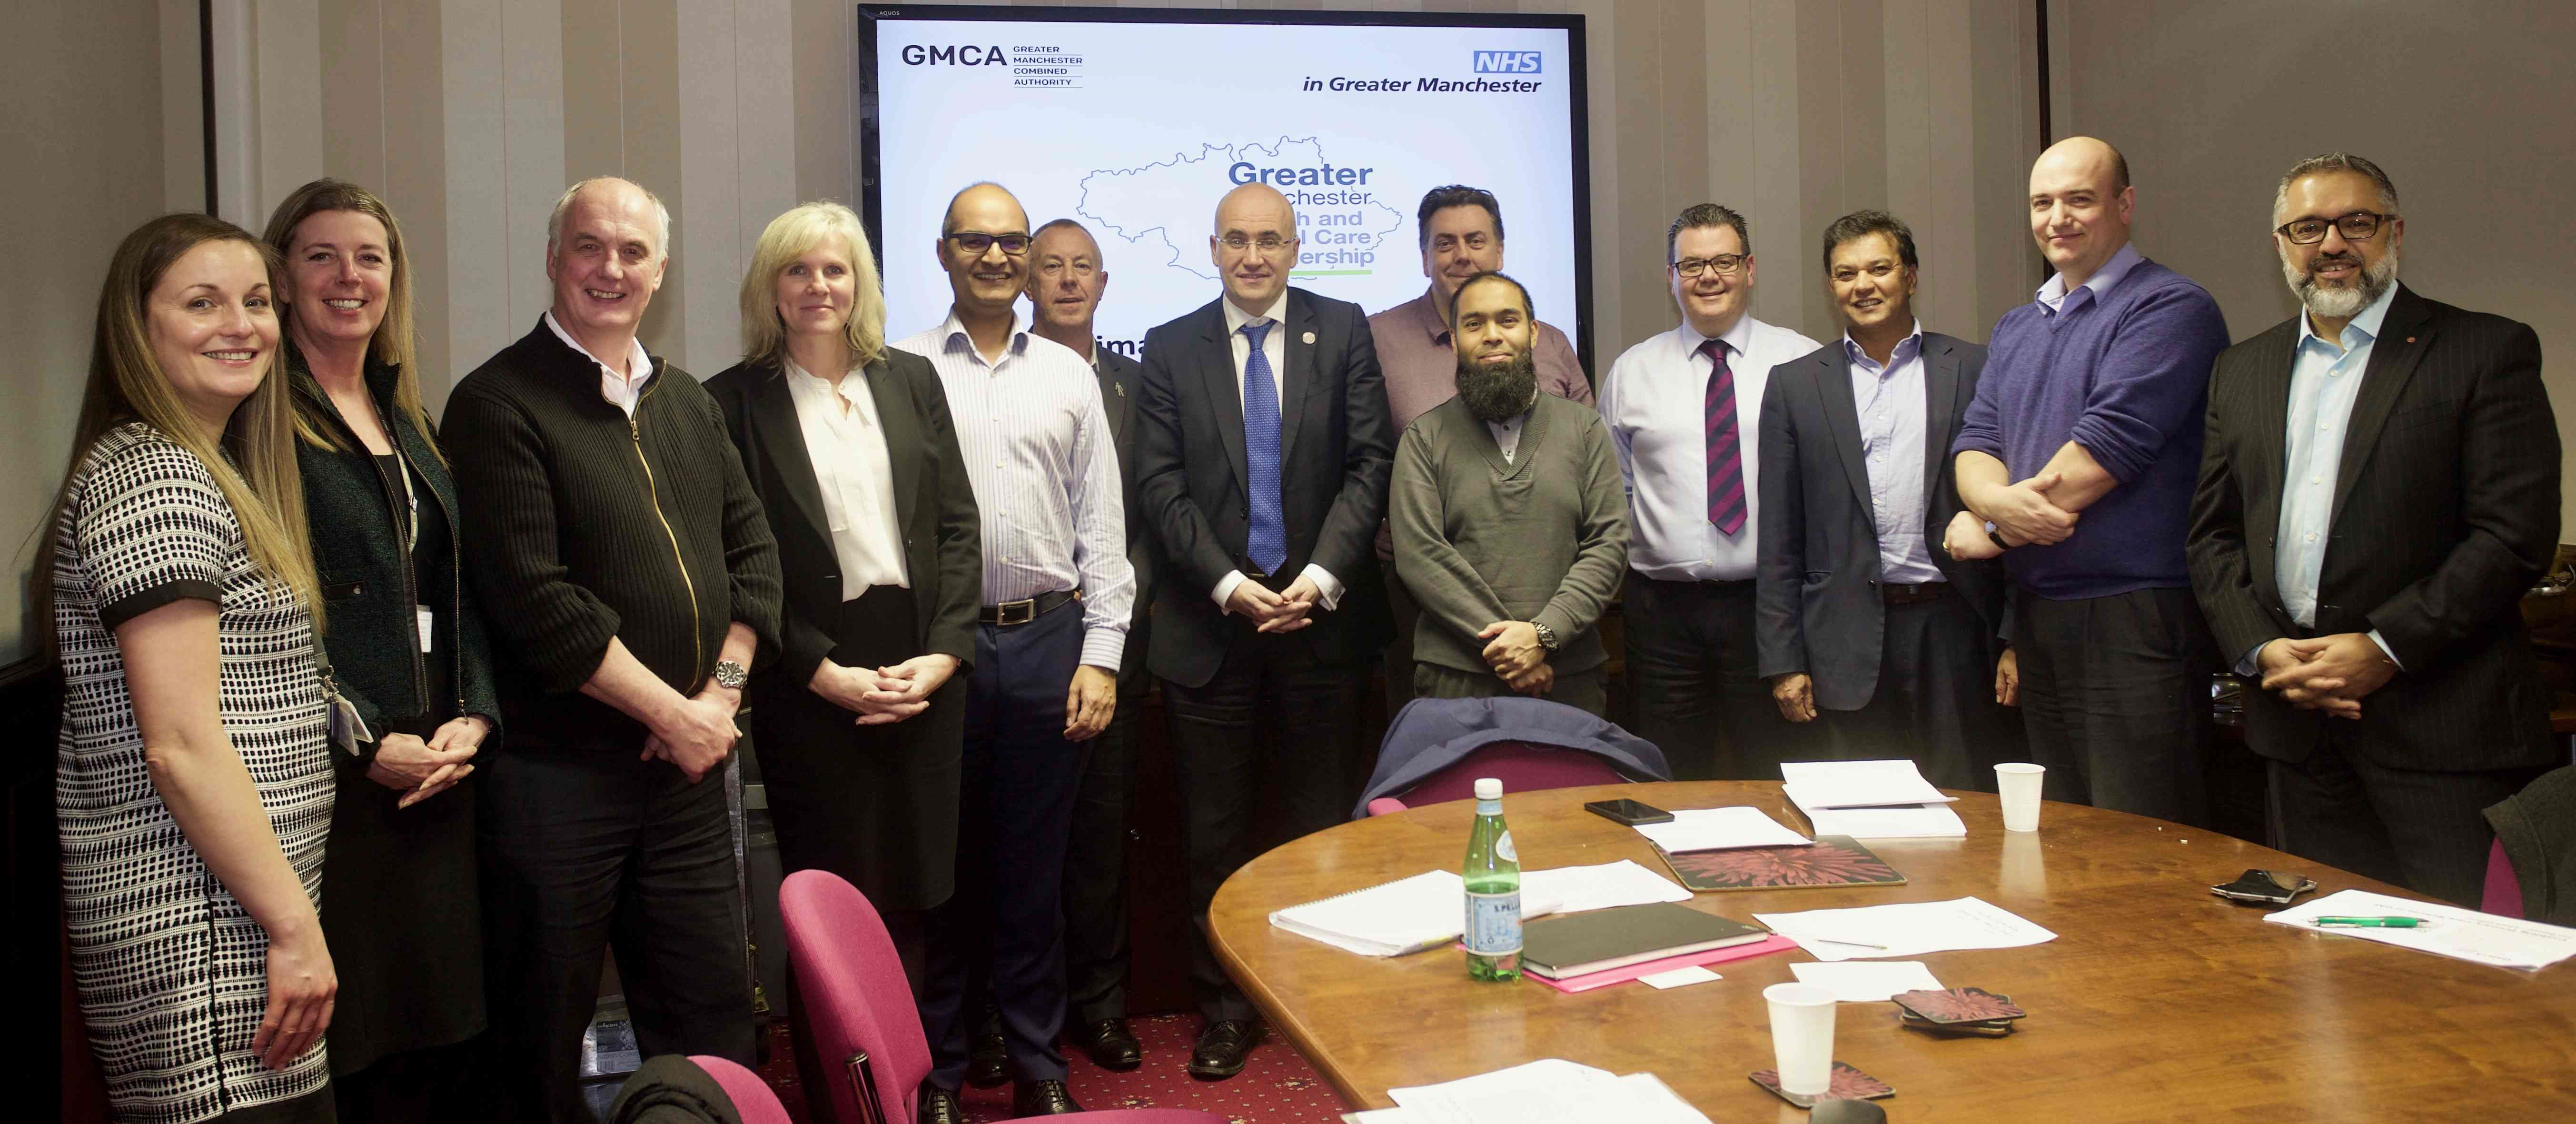 Association of Greater Manchester Local Medical Committees with Jon Rouse, Laura Browse and Sara Roscoe from the Greater Manchester Health & Social Care Partnership